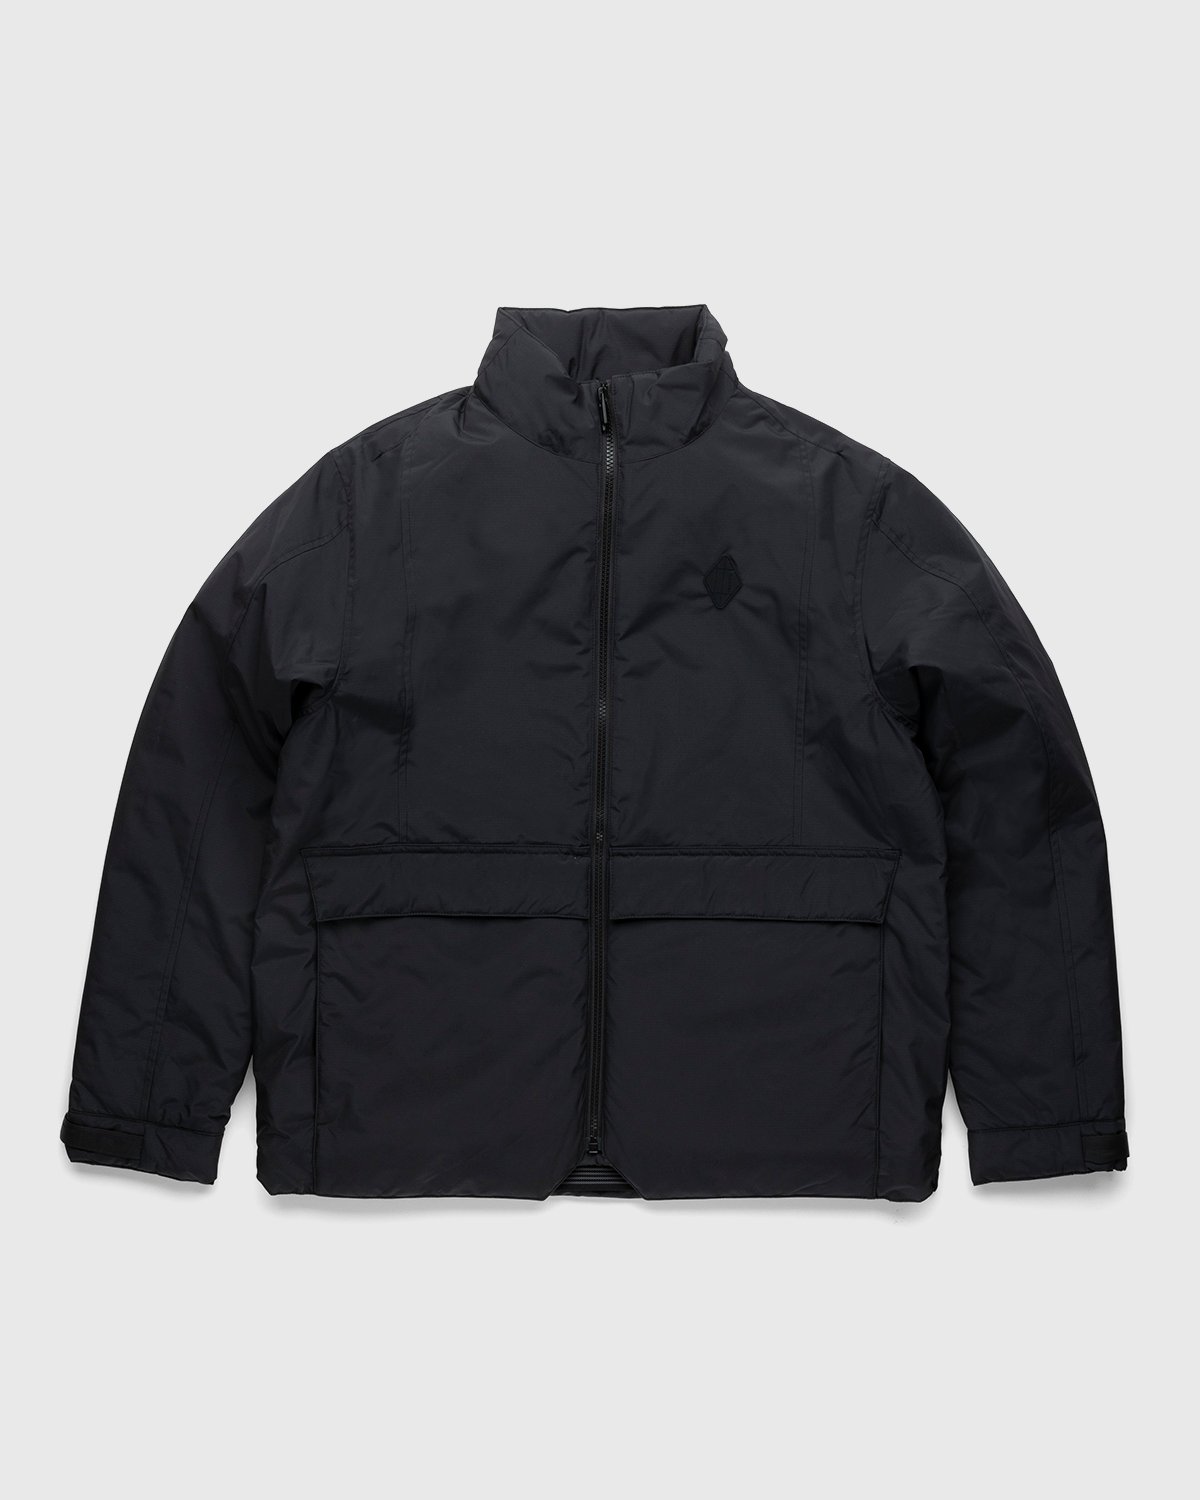 A-Cold-Wall* - Technical Bomber Black - Clothing - Black - Image 1